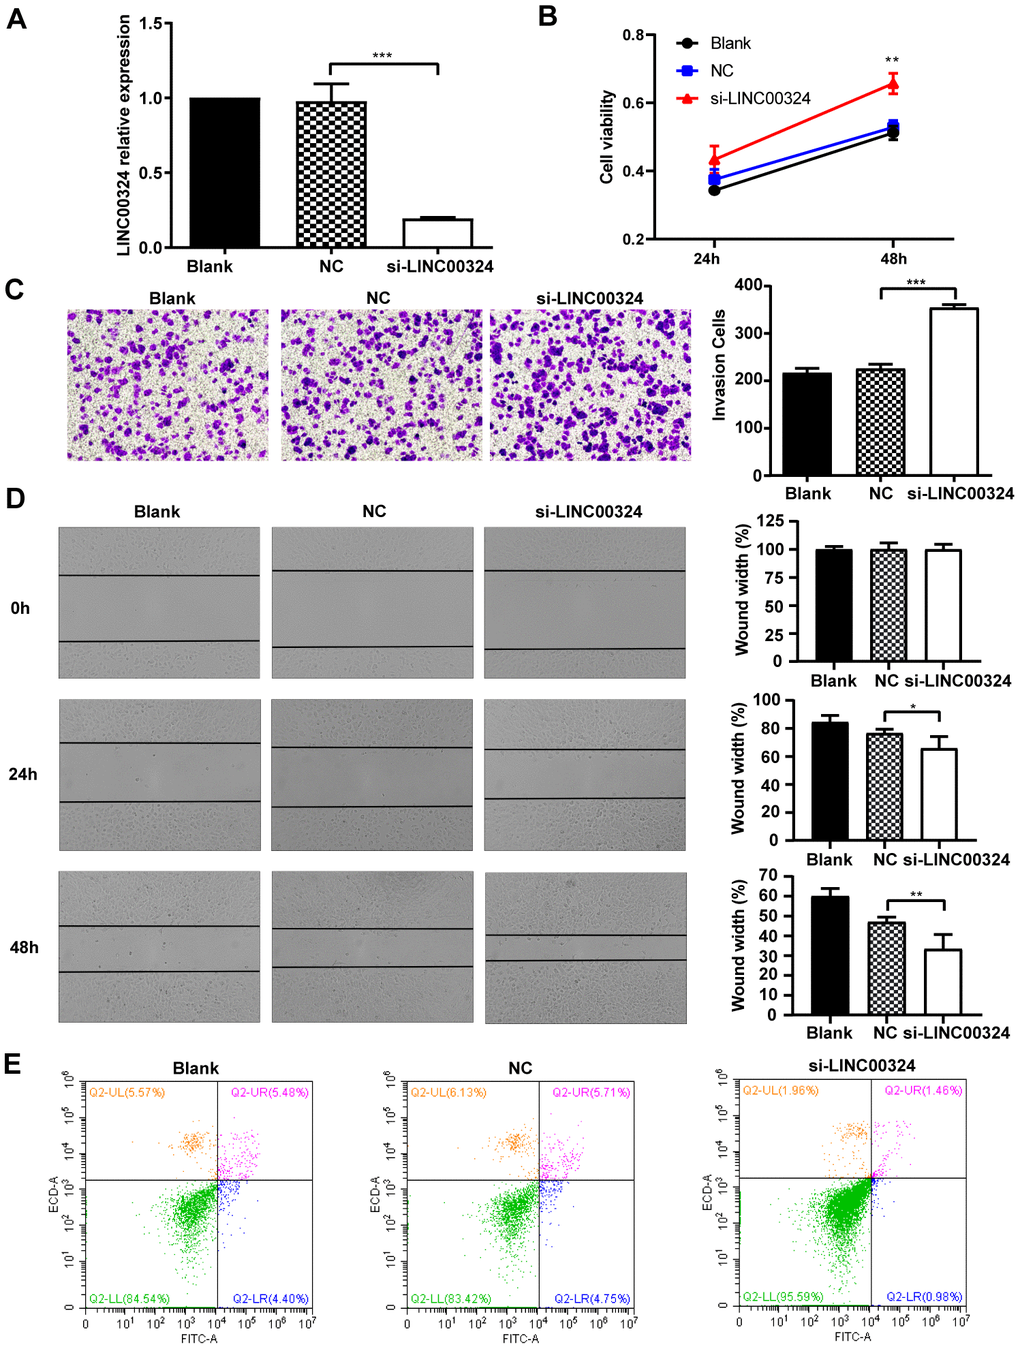 LINC00324 knockdown promotes the proliferative ability of MCF-7 cells. (A) qRT-PCR assays for LINC00324 levels in MCF-7 cells transfected with siRNA targeting LINC00324. (B) MCF-7 cells proliferation was detected by MTT assay after LINC00324 knockdown. (C) Transwell assays performed with MCF-7 cells transfected with LINC00324 siRNA or with negative control siRNA. (D) Wound healing assay was performed to determine the migration ability of MCF-7 cells after being transfected with LINC00324 siRNA or with negative control siRNA. (E) Flow cytometry analysis of the percentage of apoptotic MCF-7 cells with LINC00324 knocked-down. * P P P A, B), or are representative of three independent experiments with similar results (C–E).